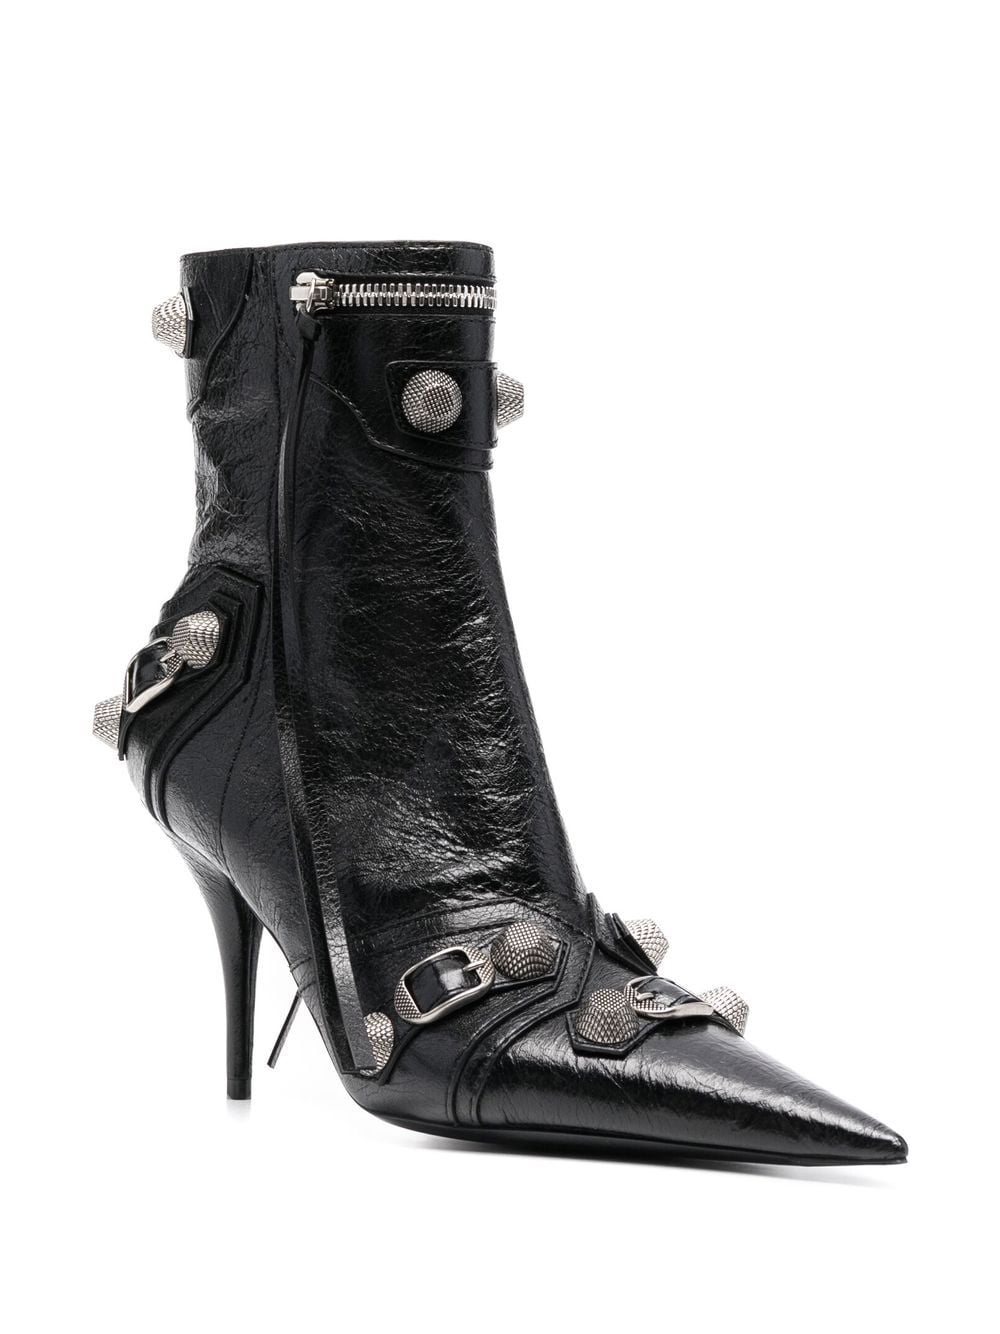 Cagole leather ankle boots<BR/><BR/><BR/>